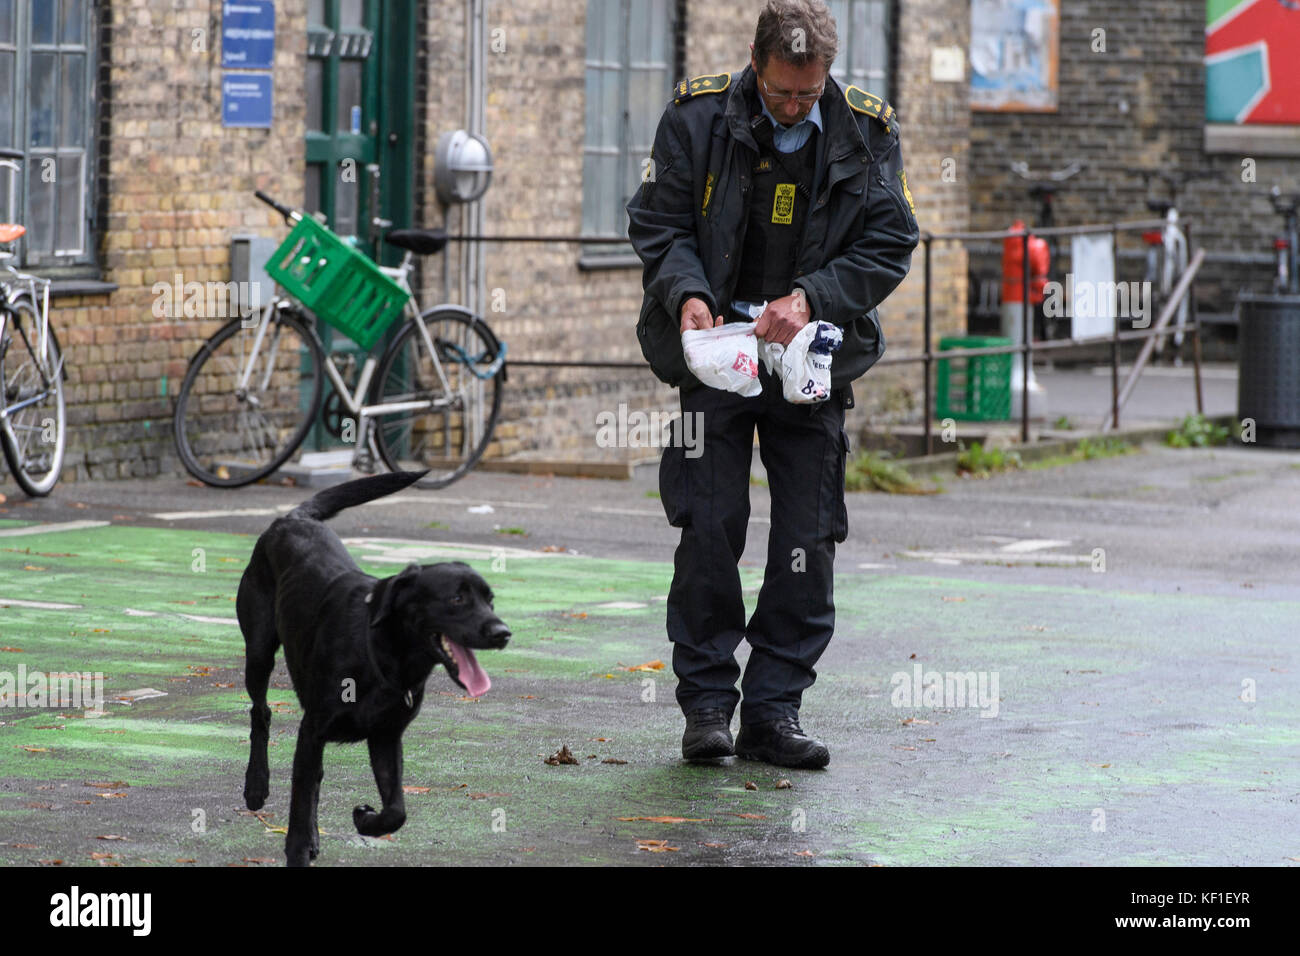 Copenhagen, Denmark. 25th October, 2017.A Danish police officer is photographed cleaning up after his dog prior to a visit from HRH Prince Harry. The animal was in the middle of its duties as sniffer-dog when it chose to take a bathroom break right where the prince was due to arrive. Credit: Matthew James Harrison / Alamy Live News Stock Photo